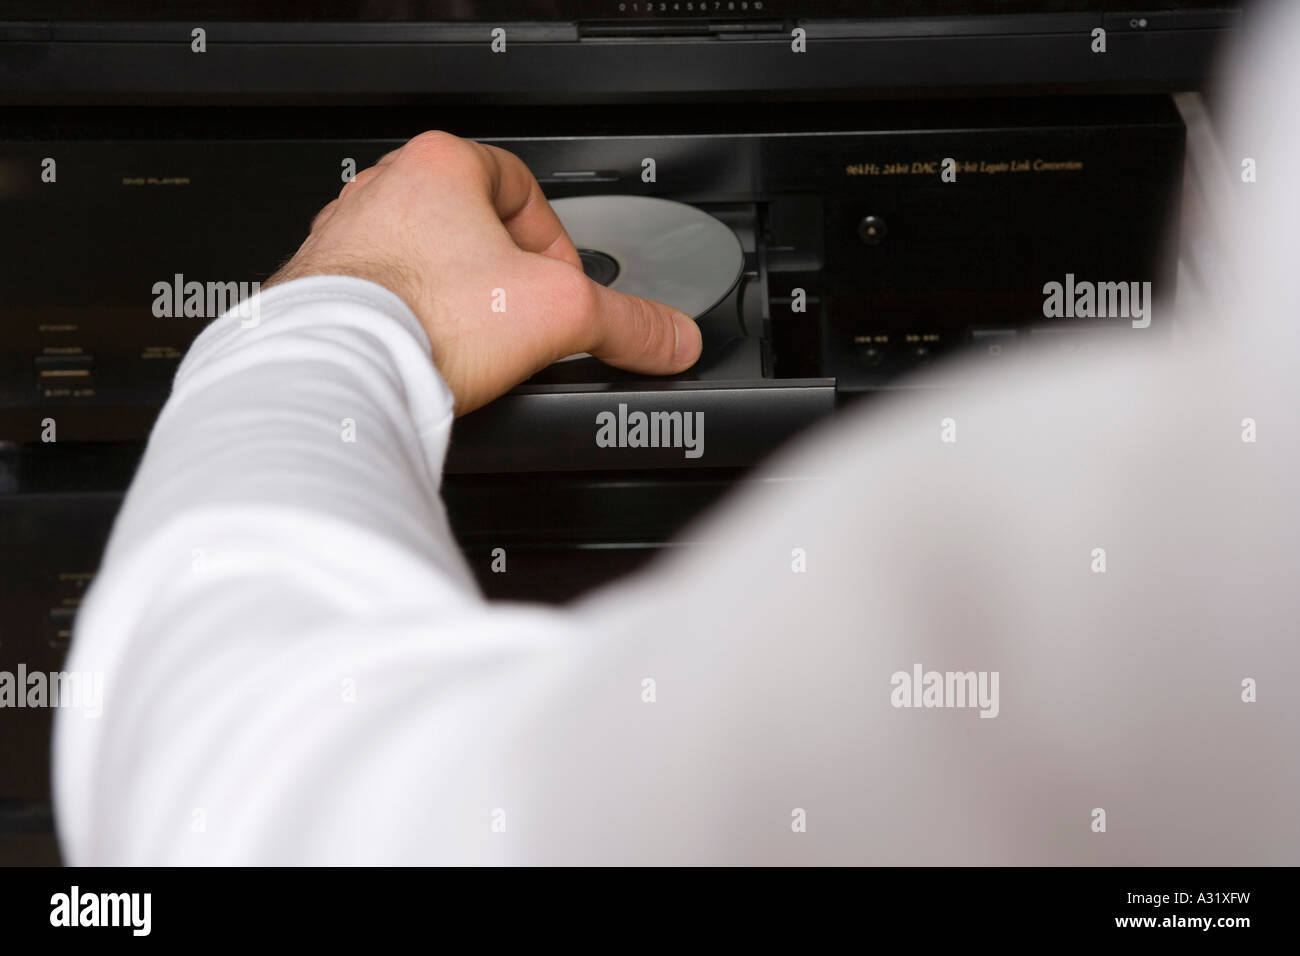 Man inserting disk into DVD player Stock Photo